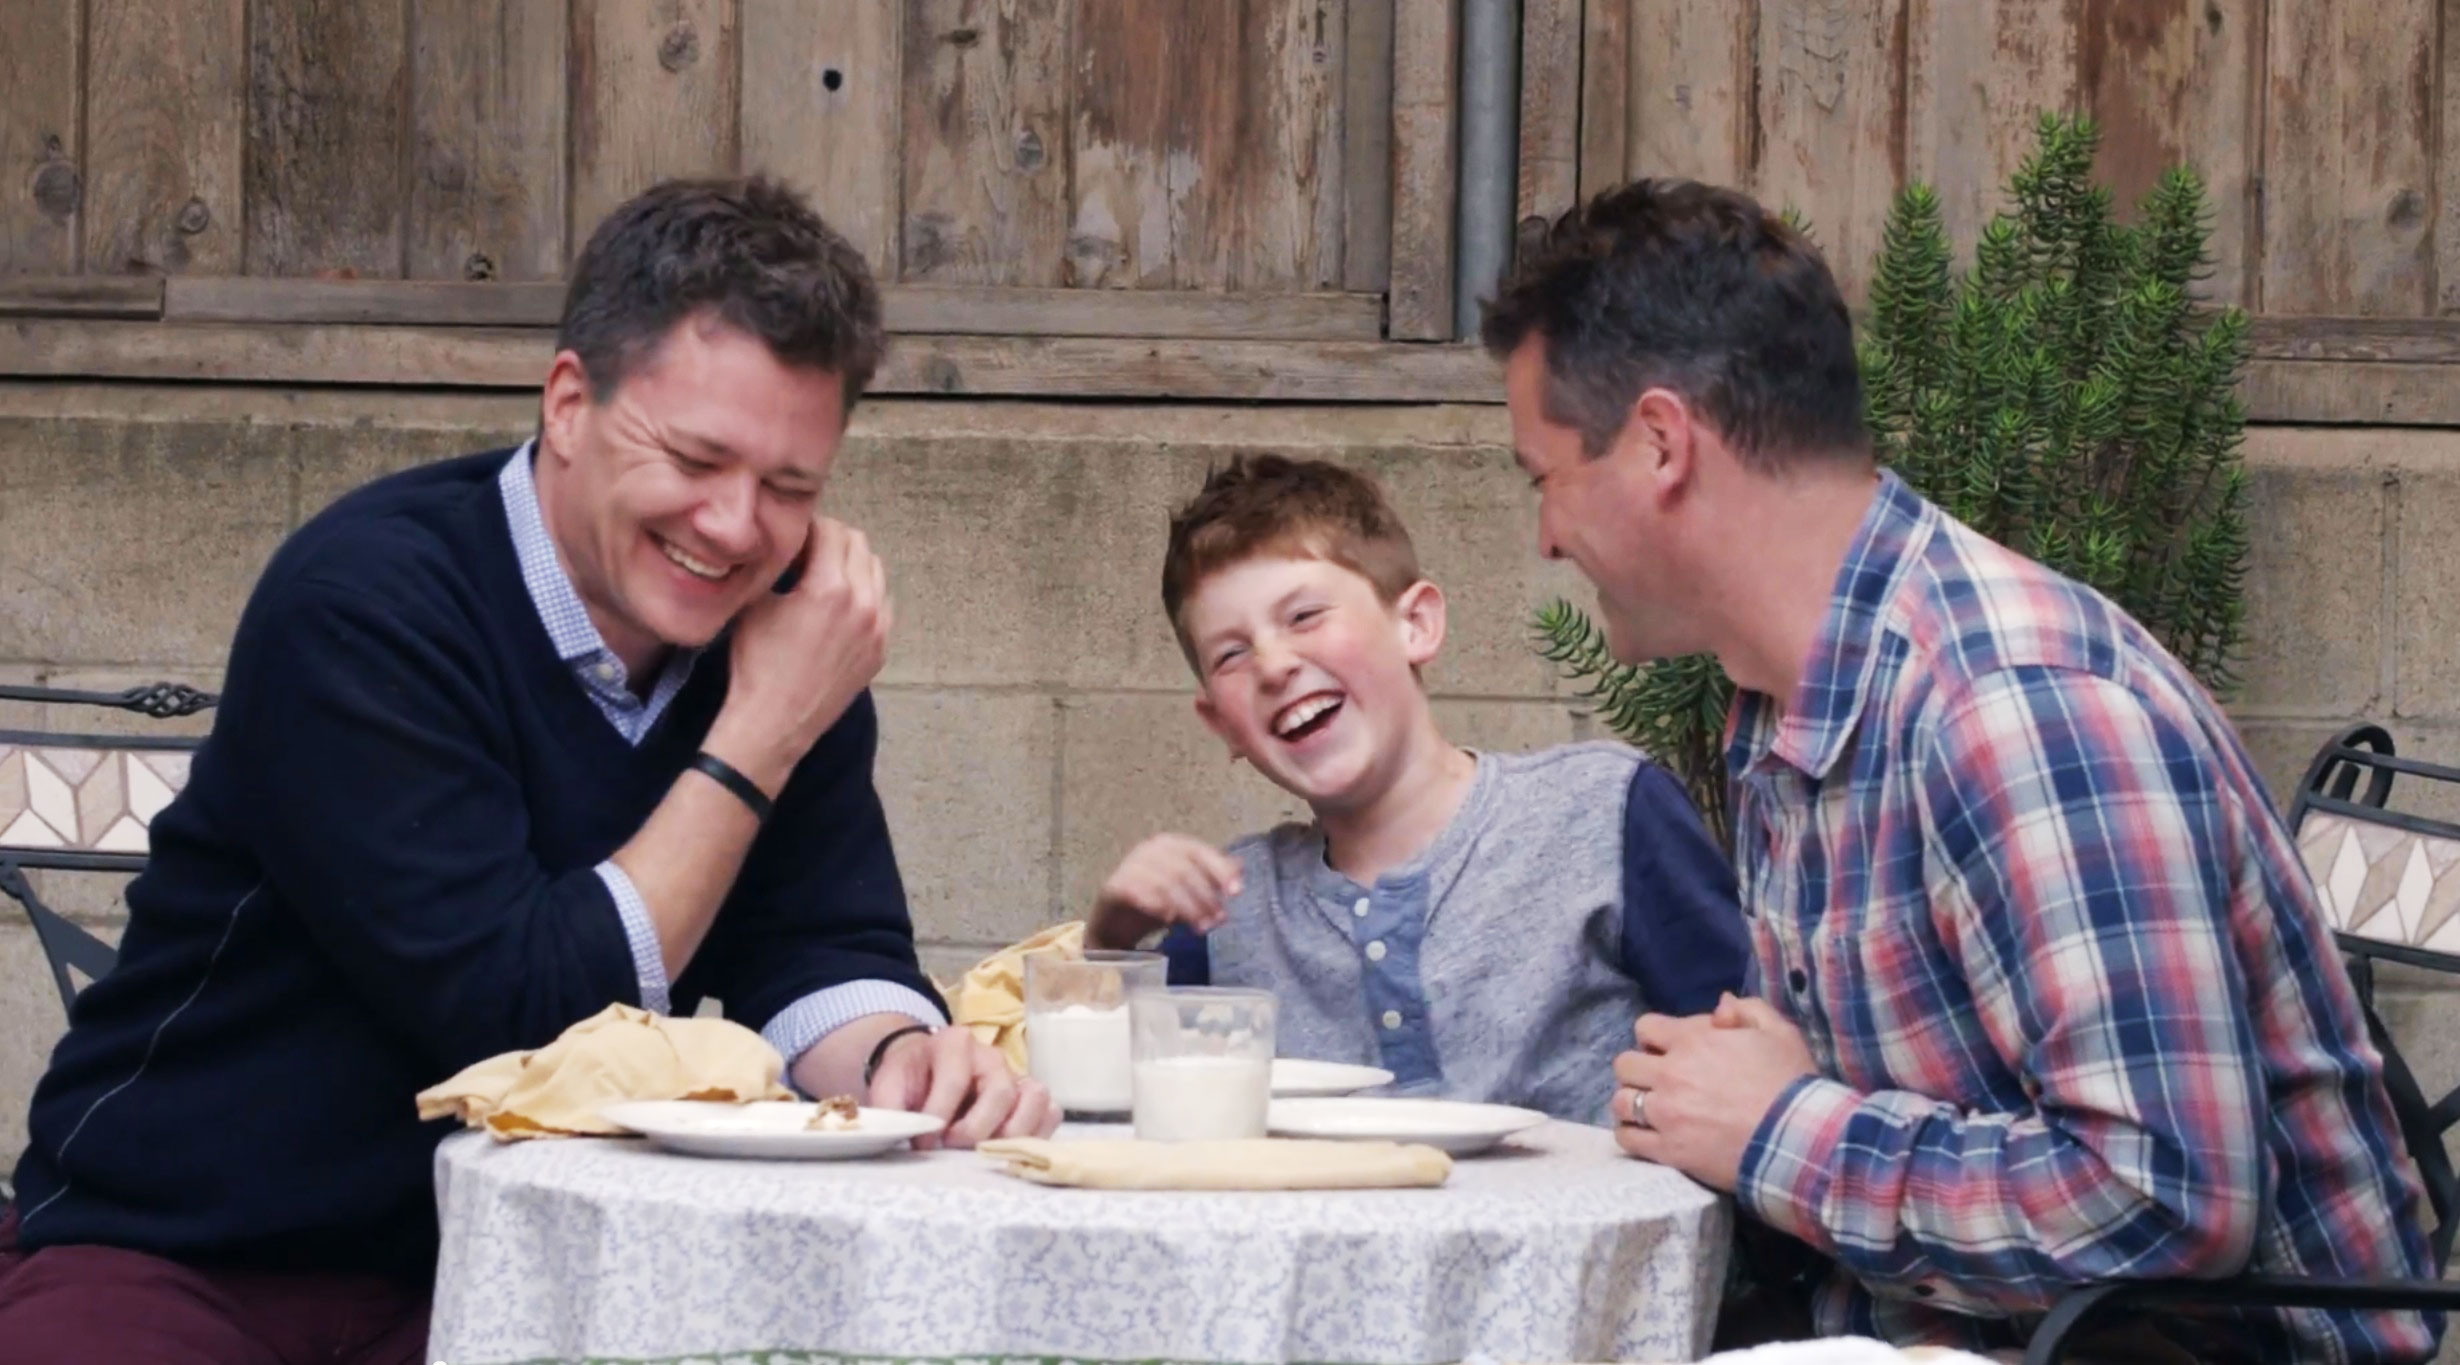 A screen capture of an ad from the Honey Maid "This is Wholesome" campaign, featuring a gay male couple who have two children.